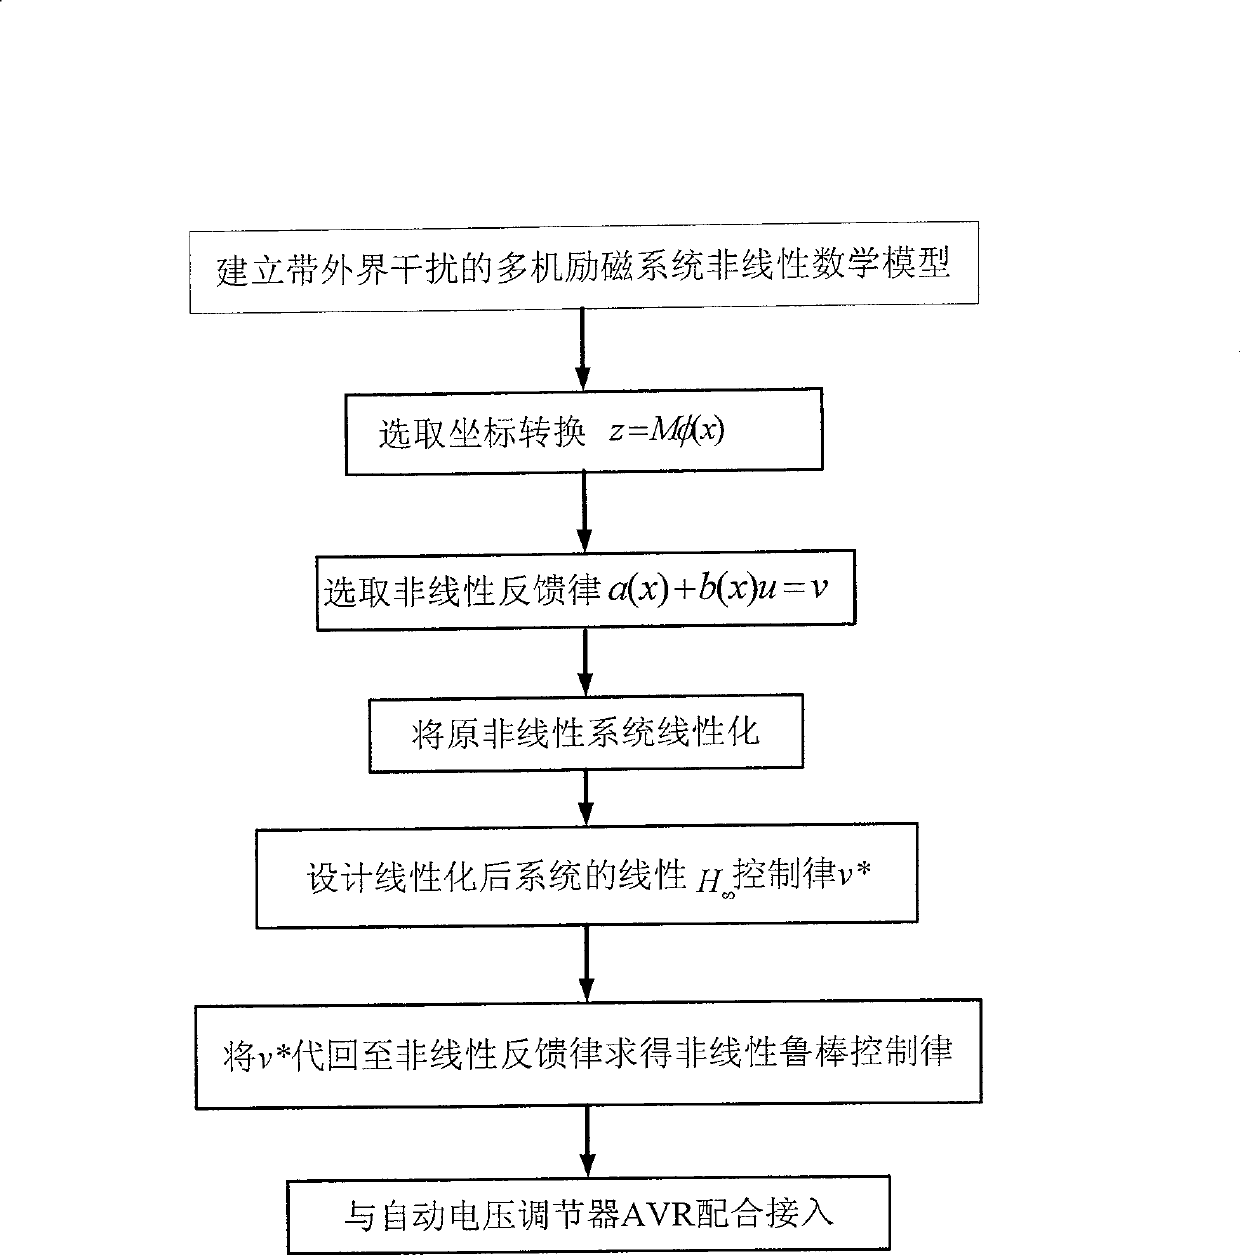 Excitation control method based on non linear robust power system stabilizer